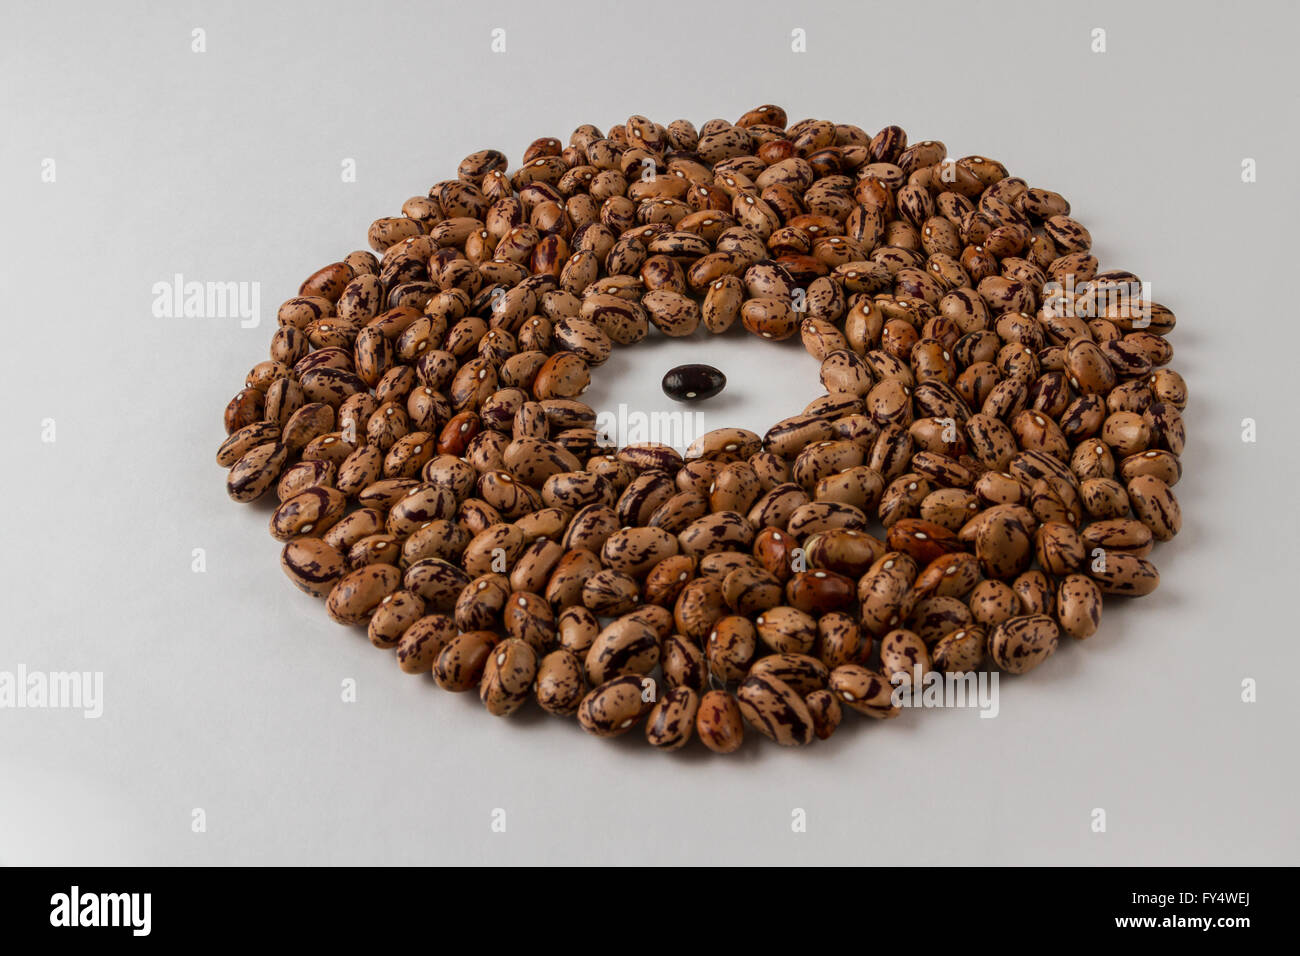 A single black bean in the middle of a circle of mottled beans Stock Photo